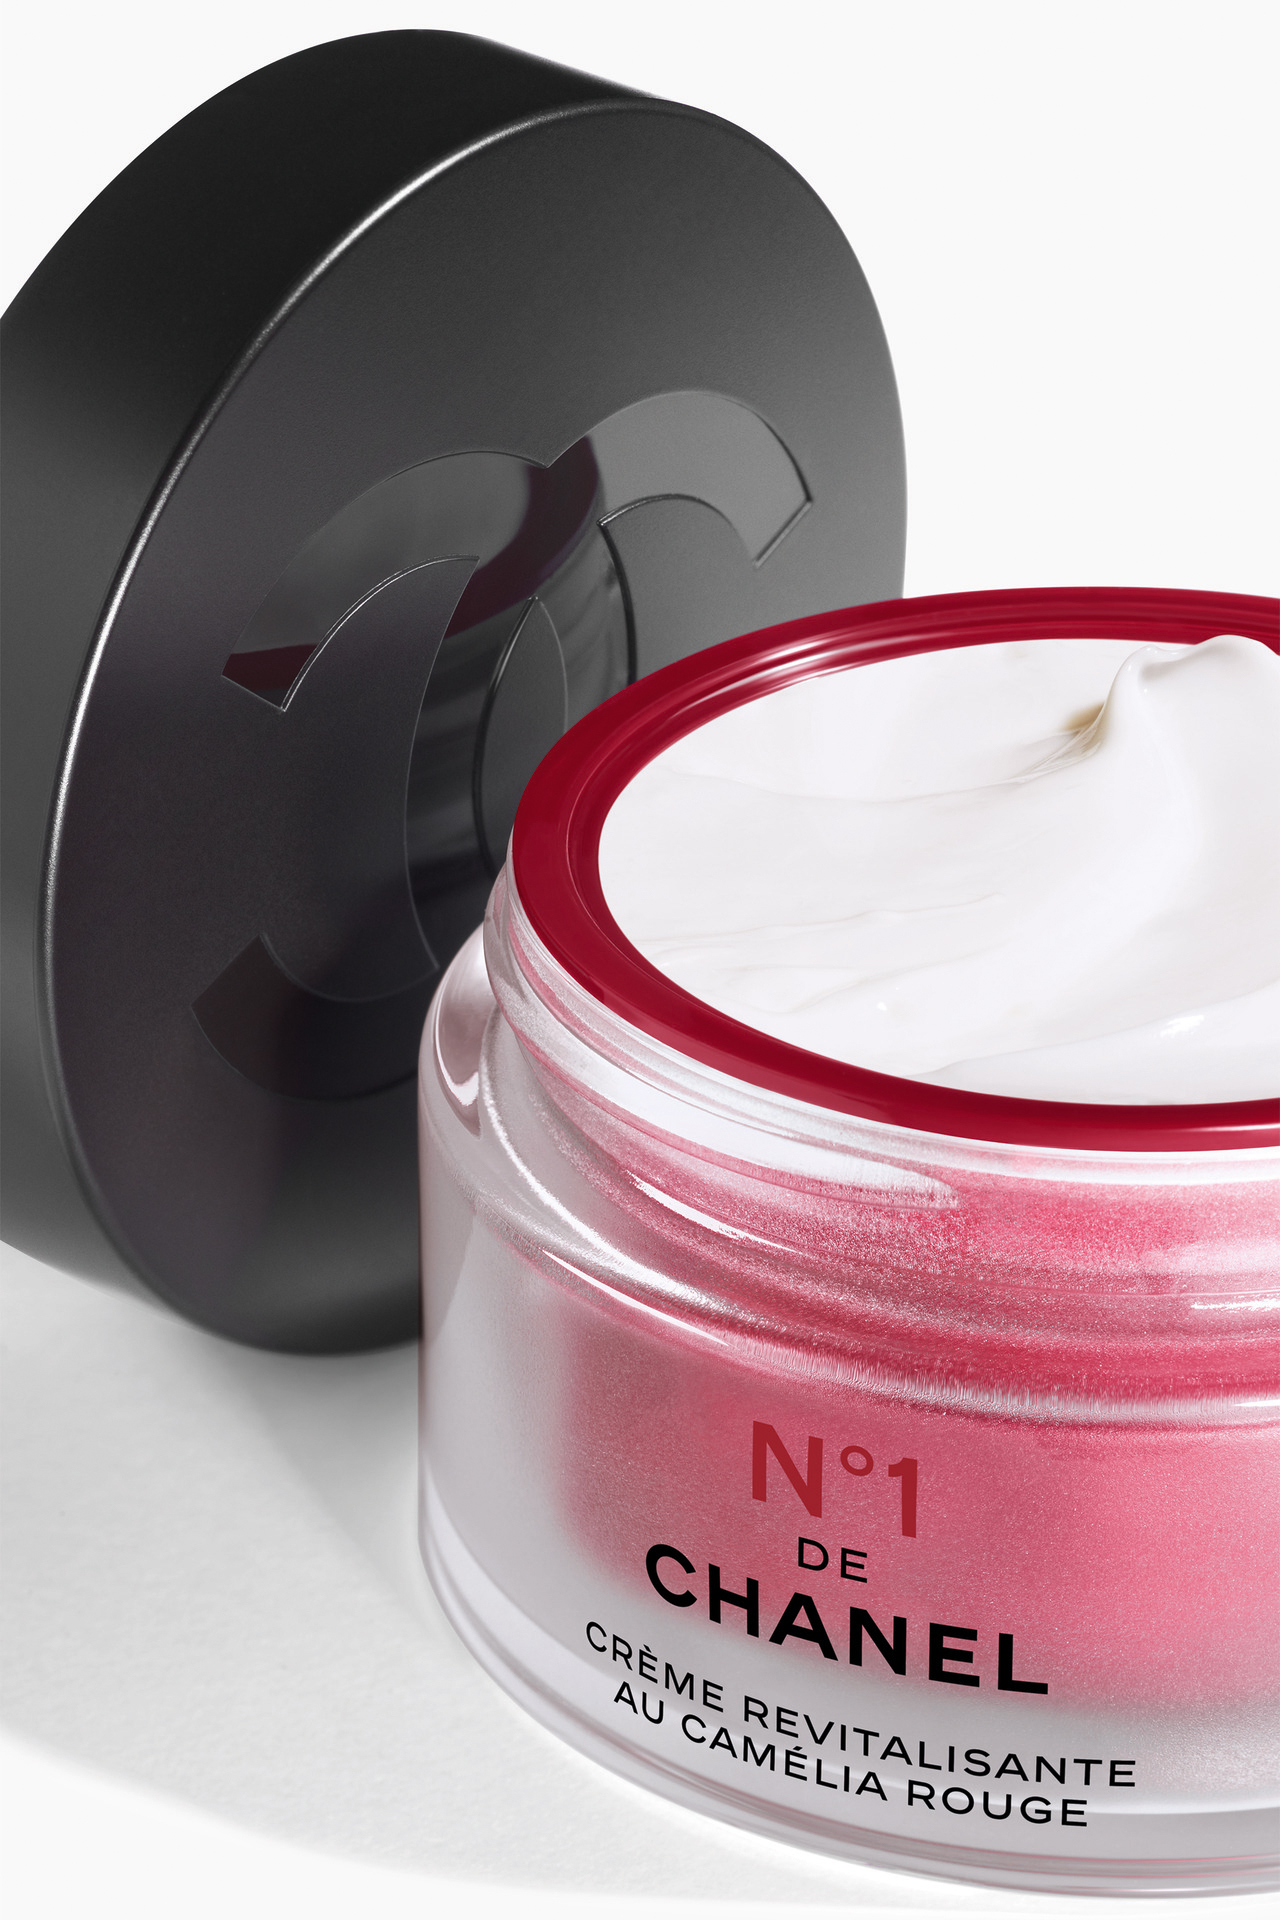 New range of beauty innovation from CHANEL with sustainable Sulapac  material - Renewable Carbon News